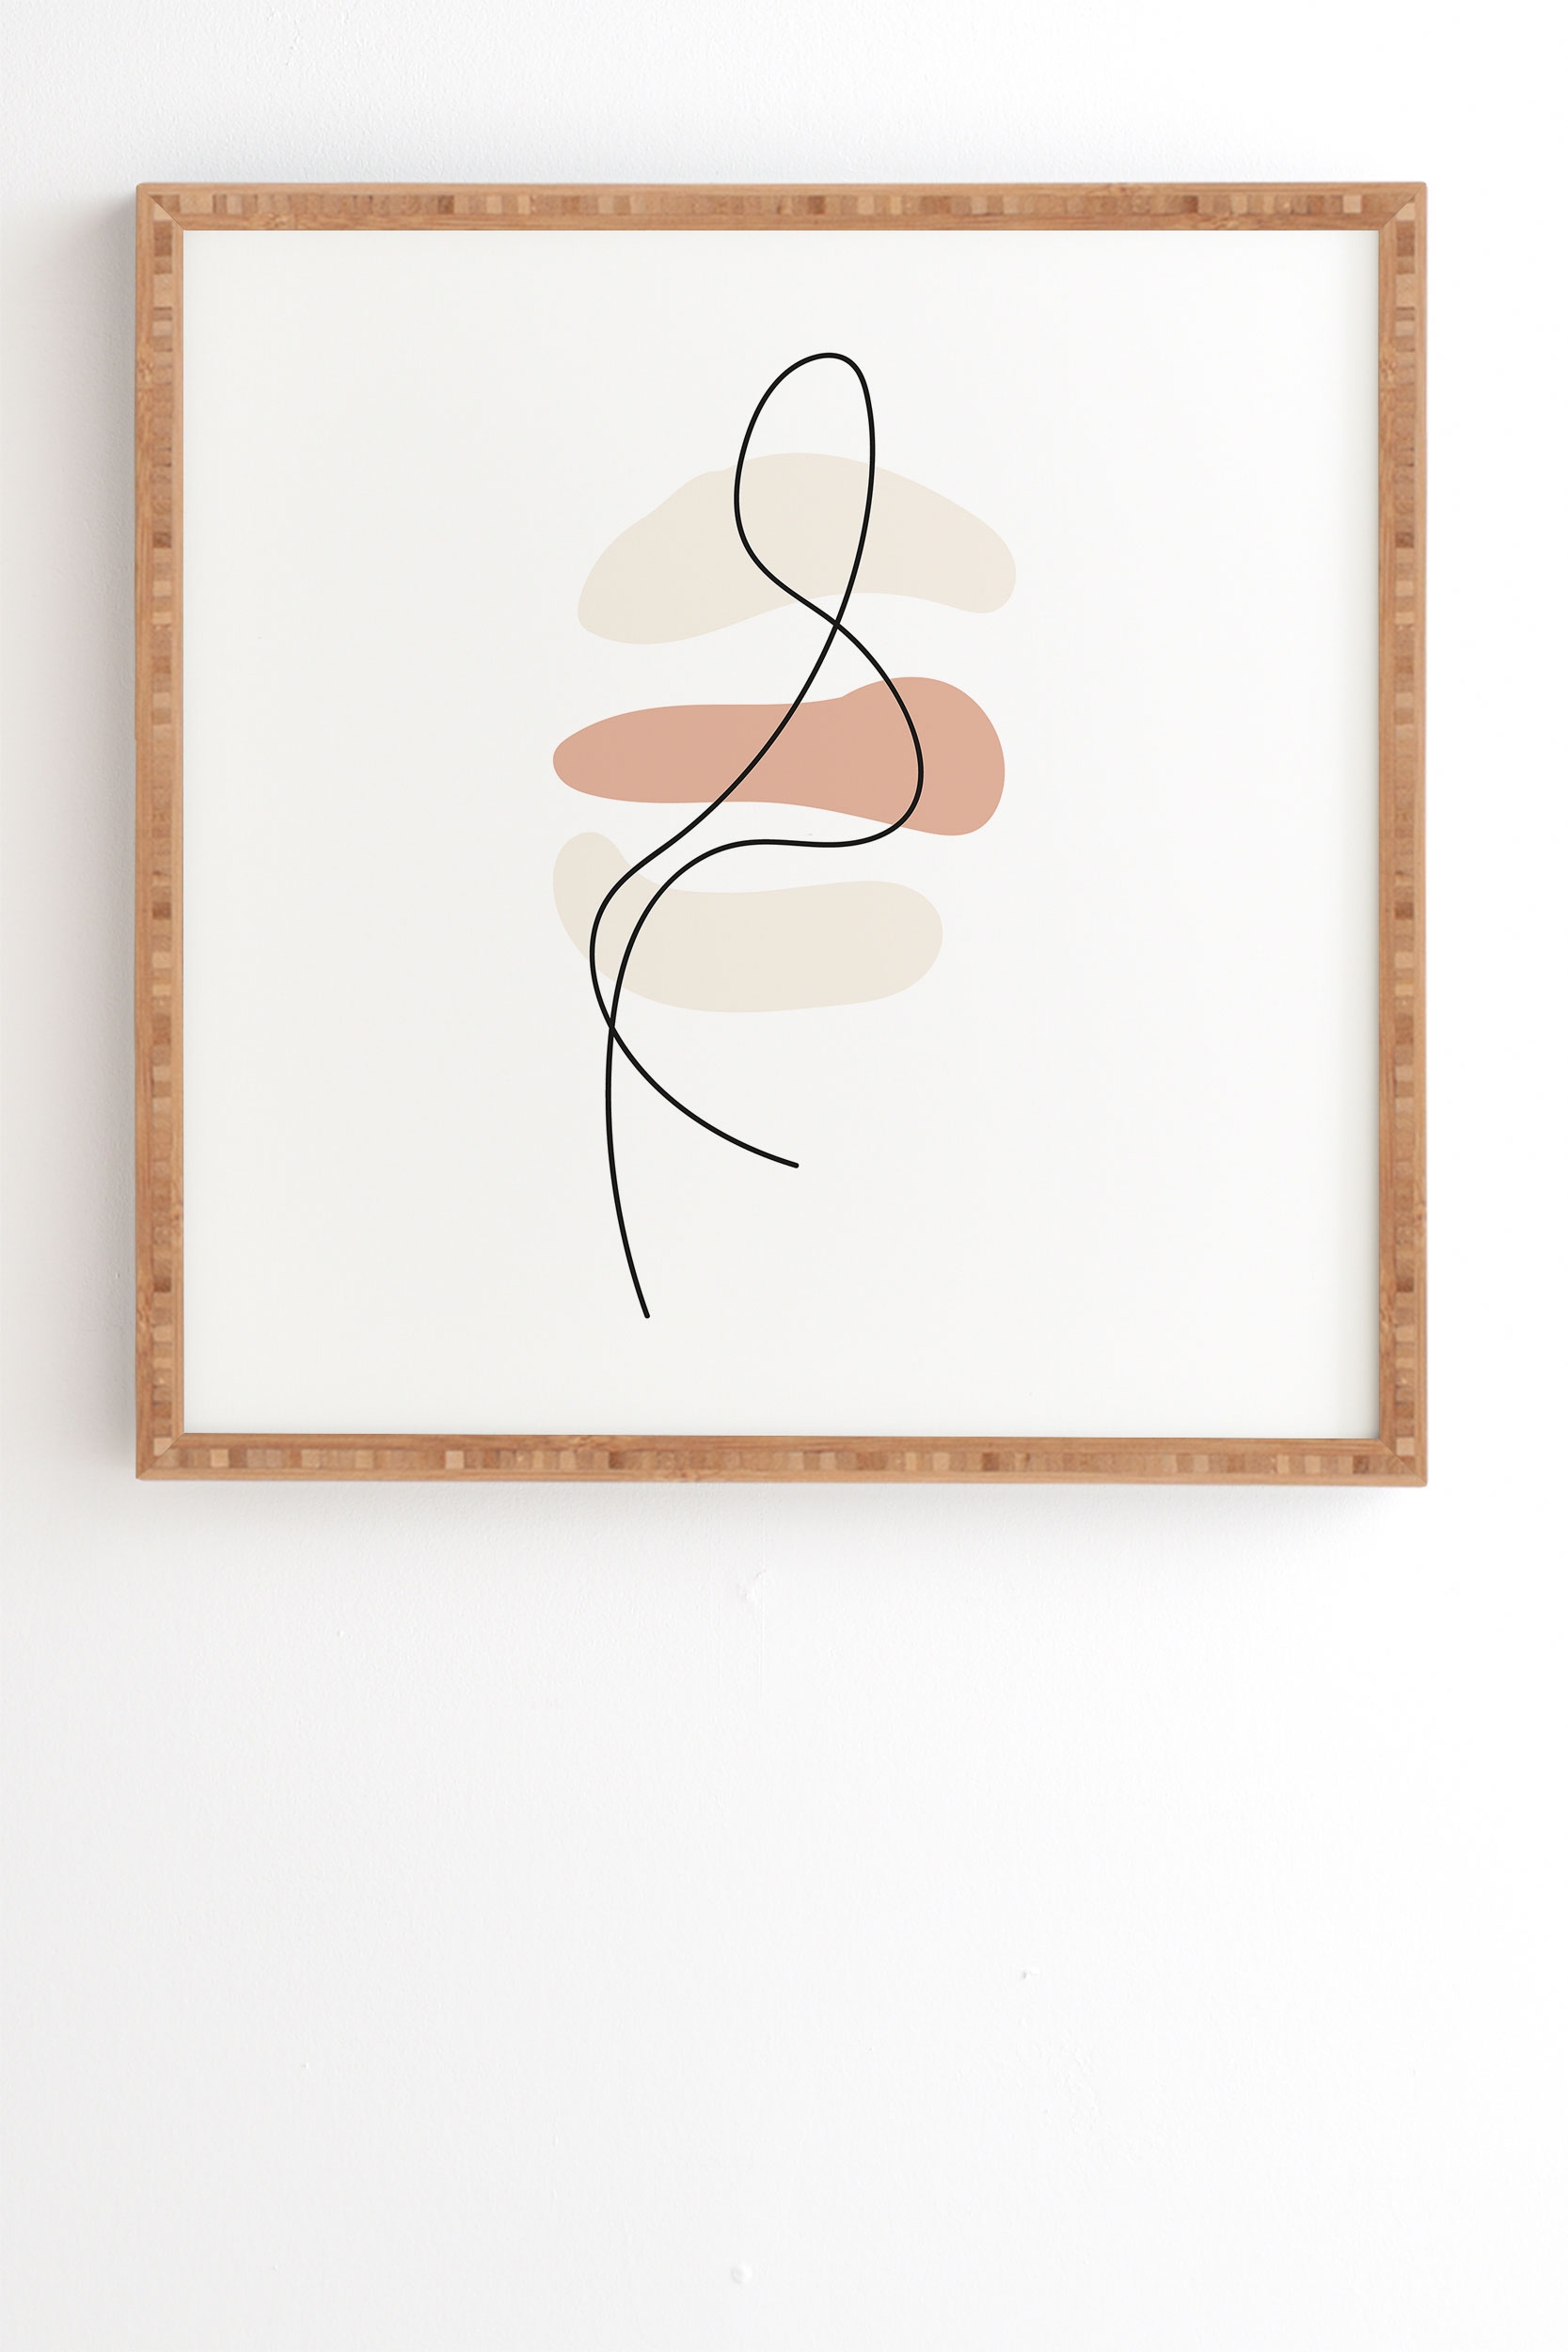 Abstract Minimal Line Beige by Mambo Art Studio - Framed Wall Art Bamboo 20" x 20" - Image 1